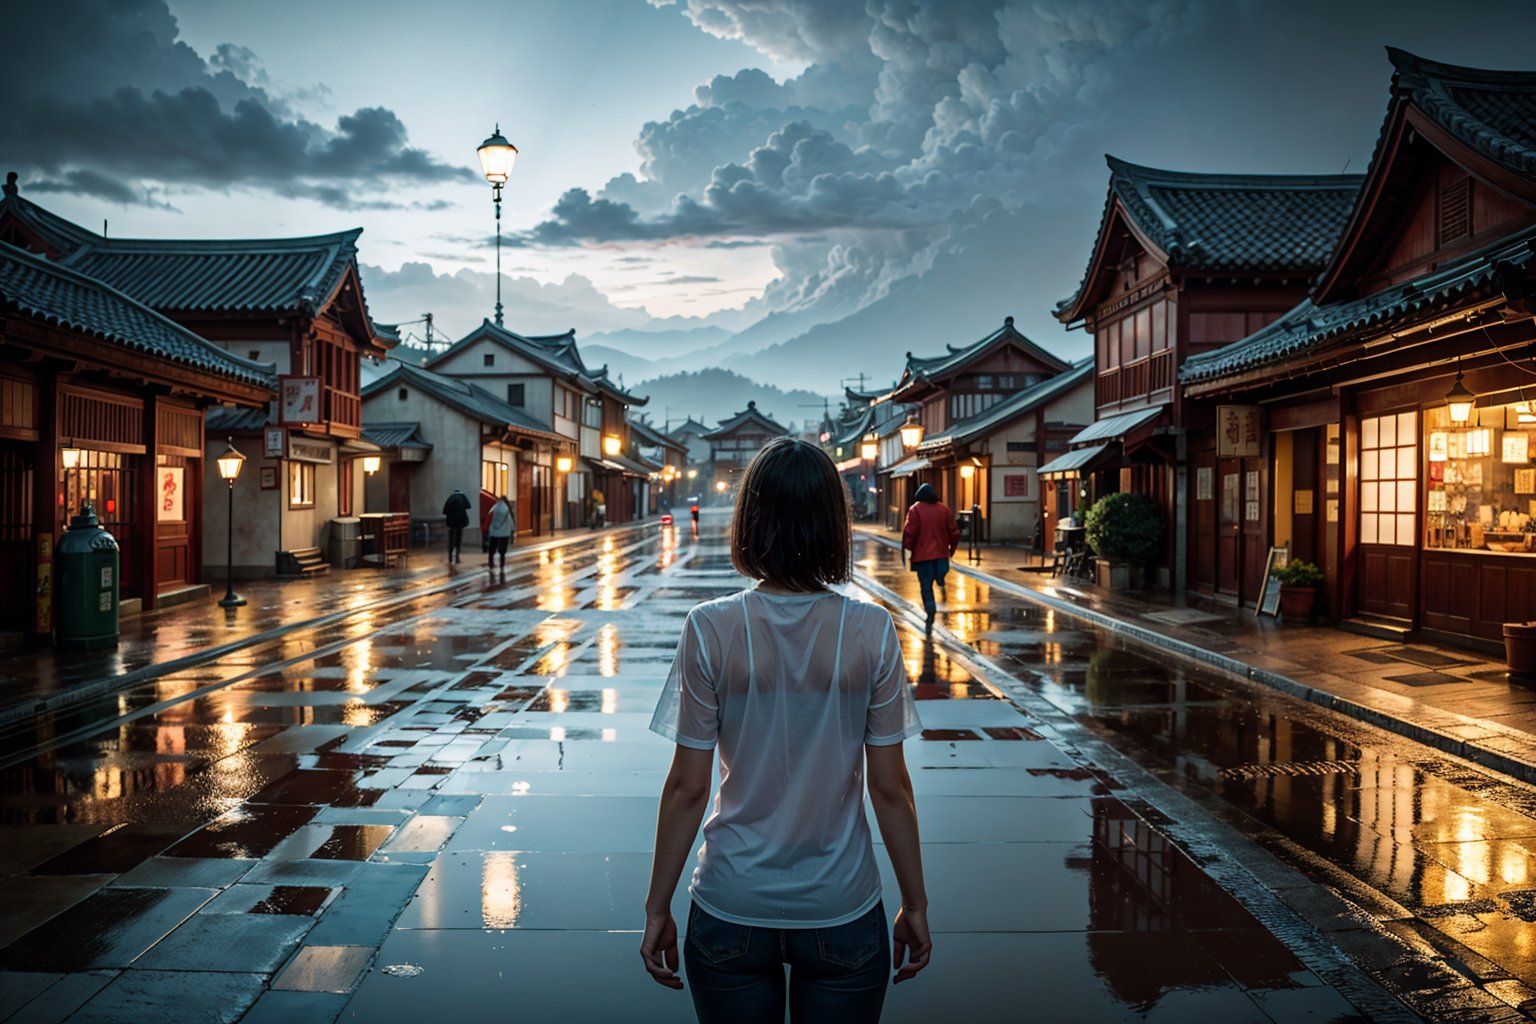 arafed view of a village with a lot of lights on the buildings, dreamy chinese town, chinese village, amazing wallpaper, japanese town, japanese village, hyper realistic photo of a town, old asian village, japanese city, by Raymond Han, rainy evening, cyberpunk chinese ancient castle, beautifully lit buildings, at evening during rain, beautiful and aesthetic, photography, cinematic, 8k, high detailed ((Heavy rain)))
